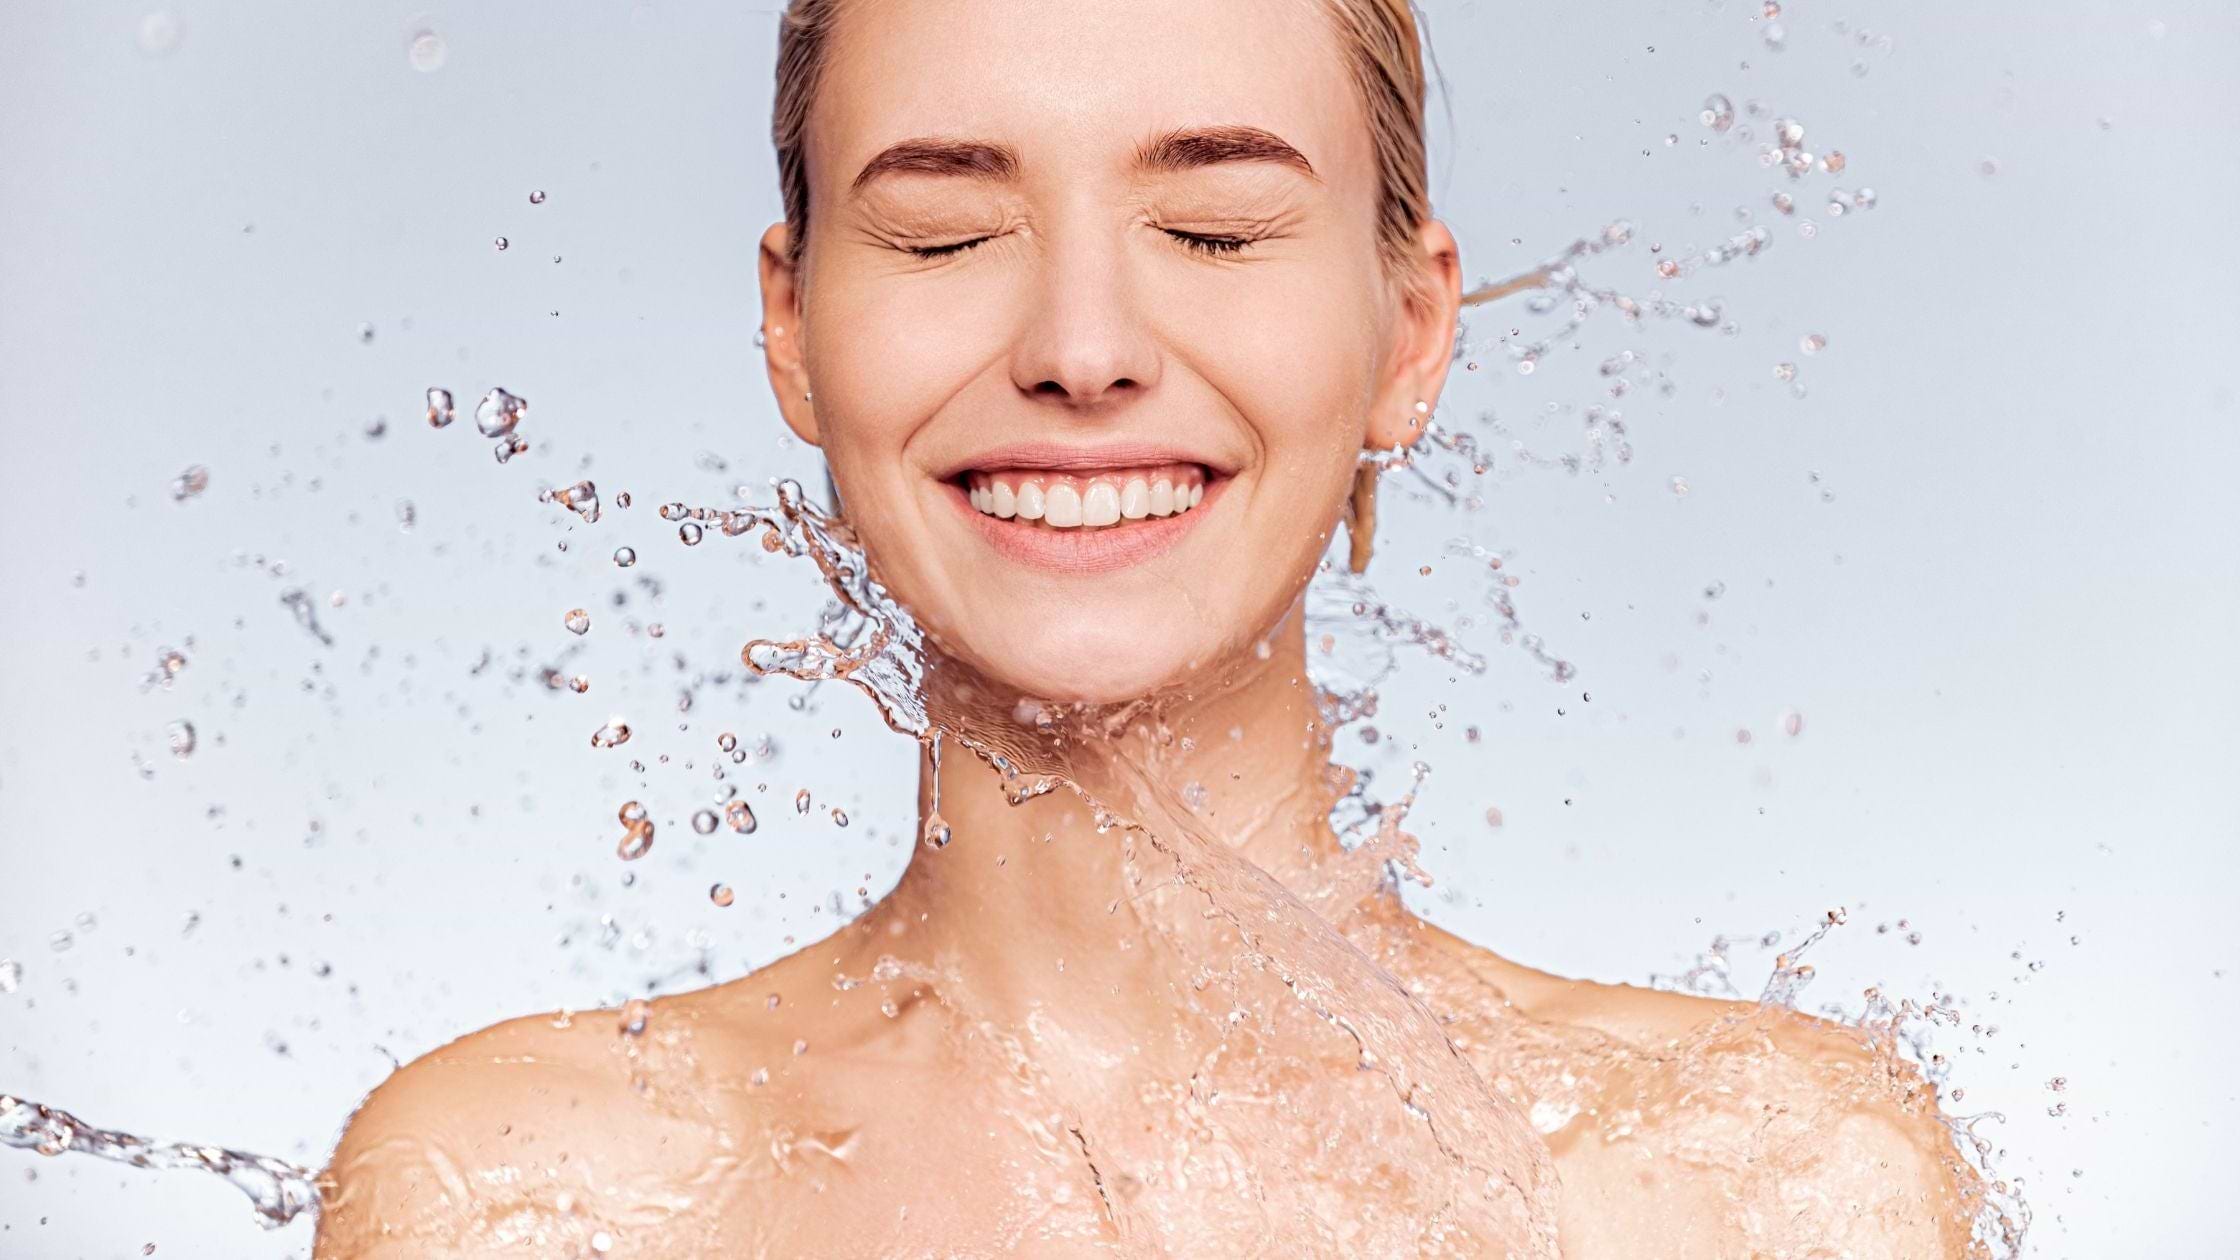 Facts about skin hydration